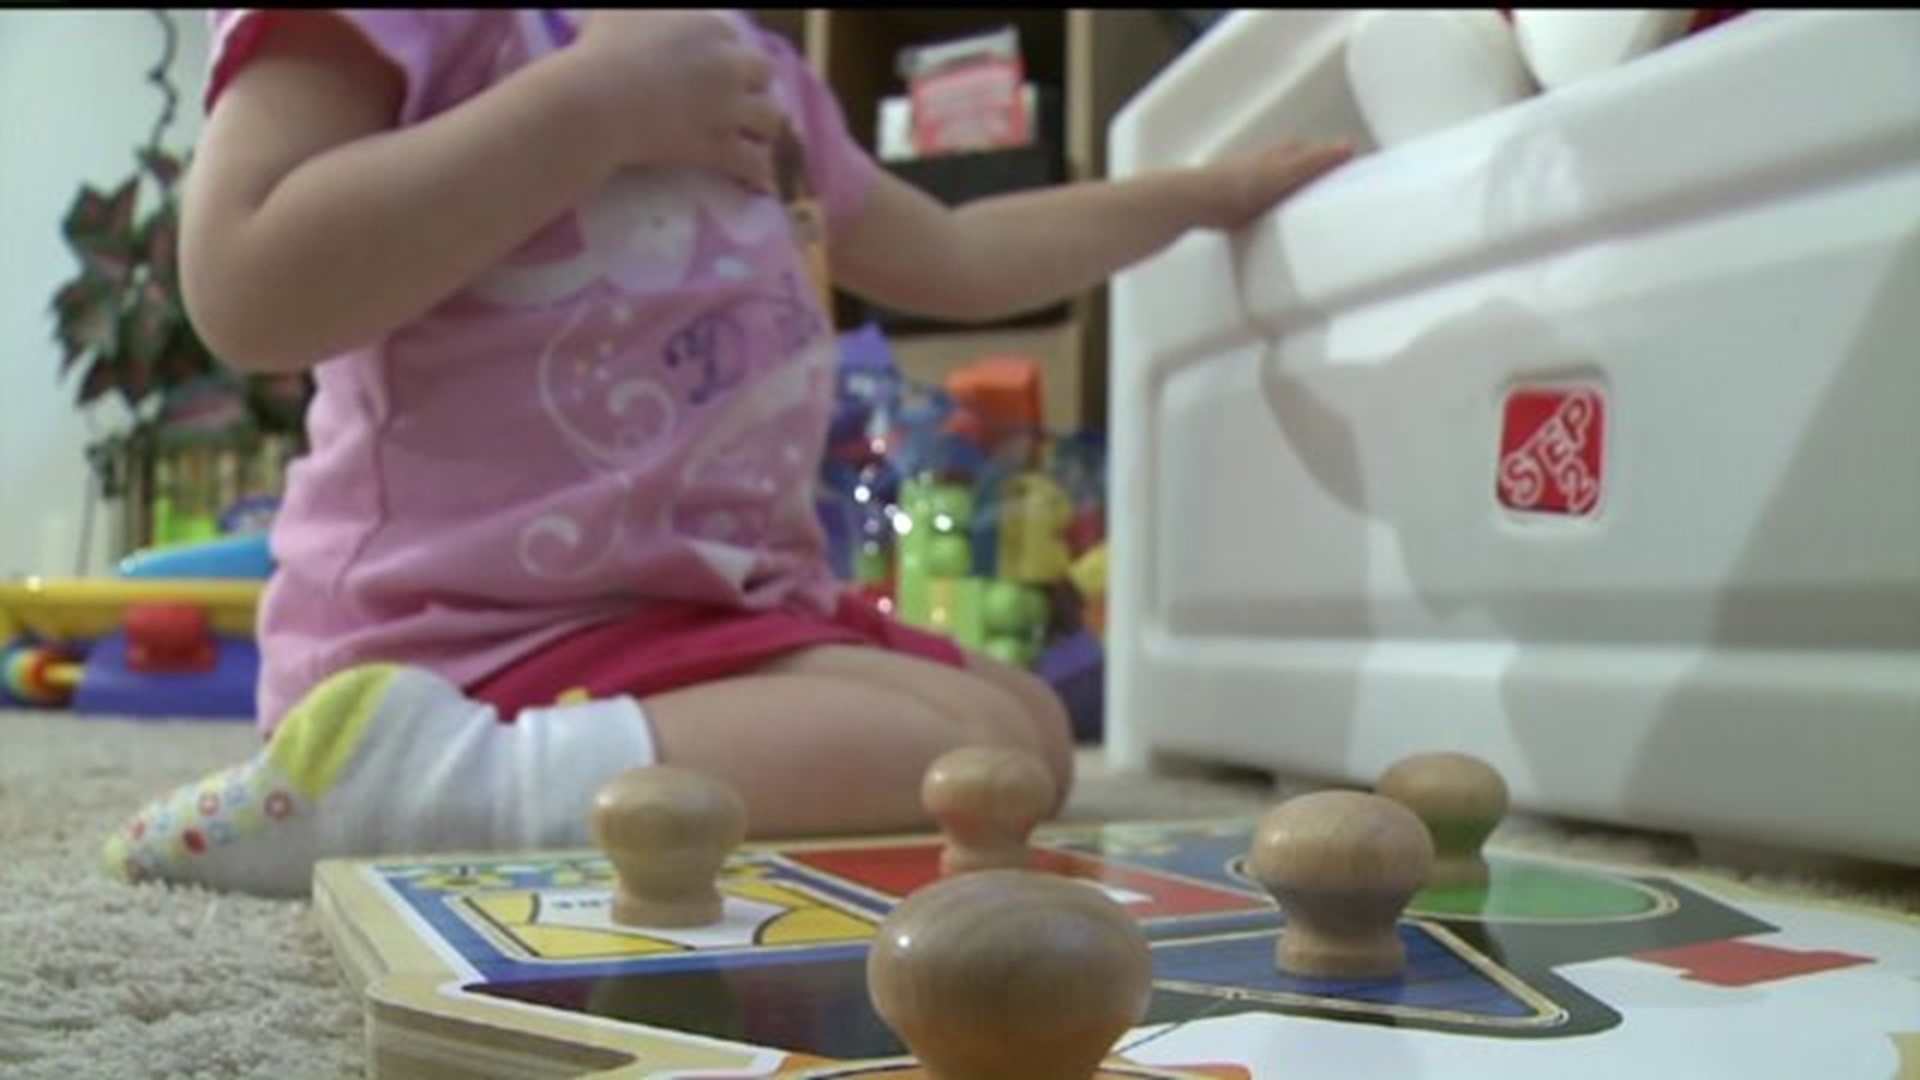 Child Care Resource and Referral closing due to Illinois budget impasse